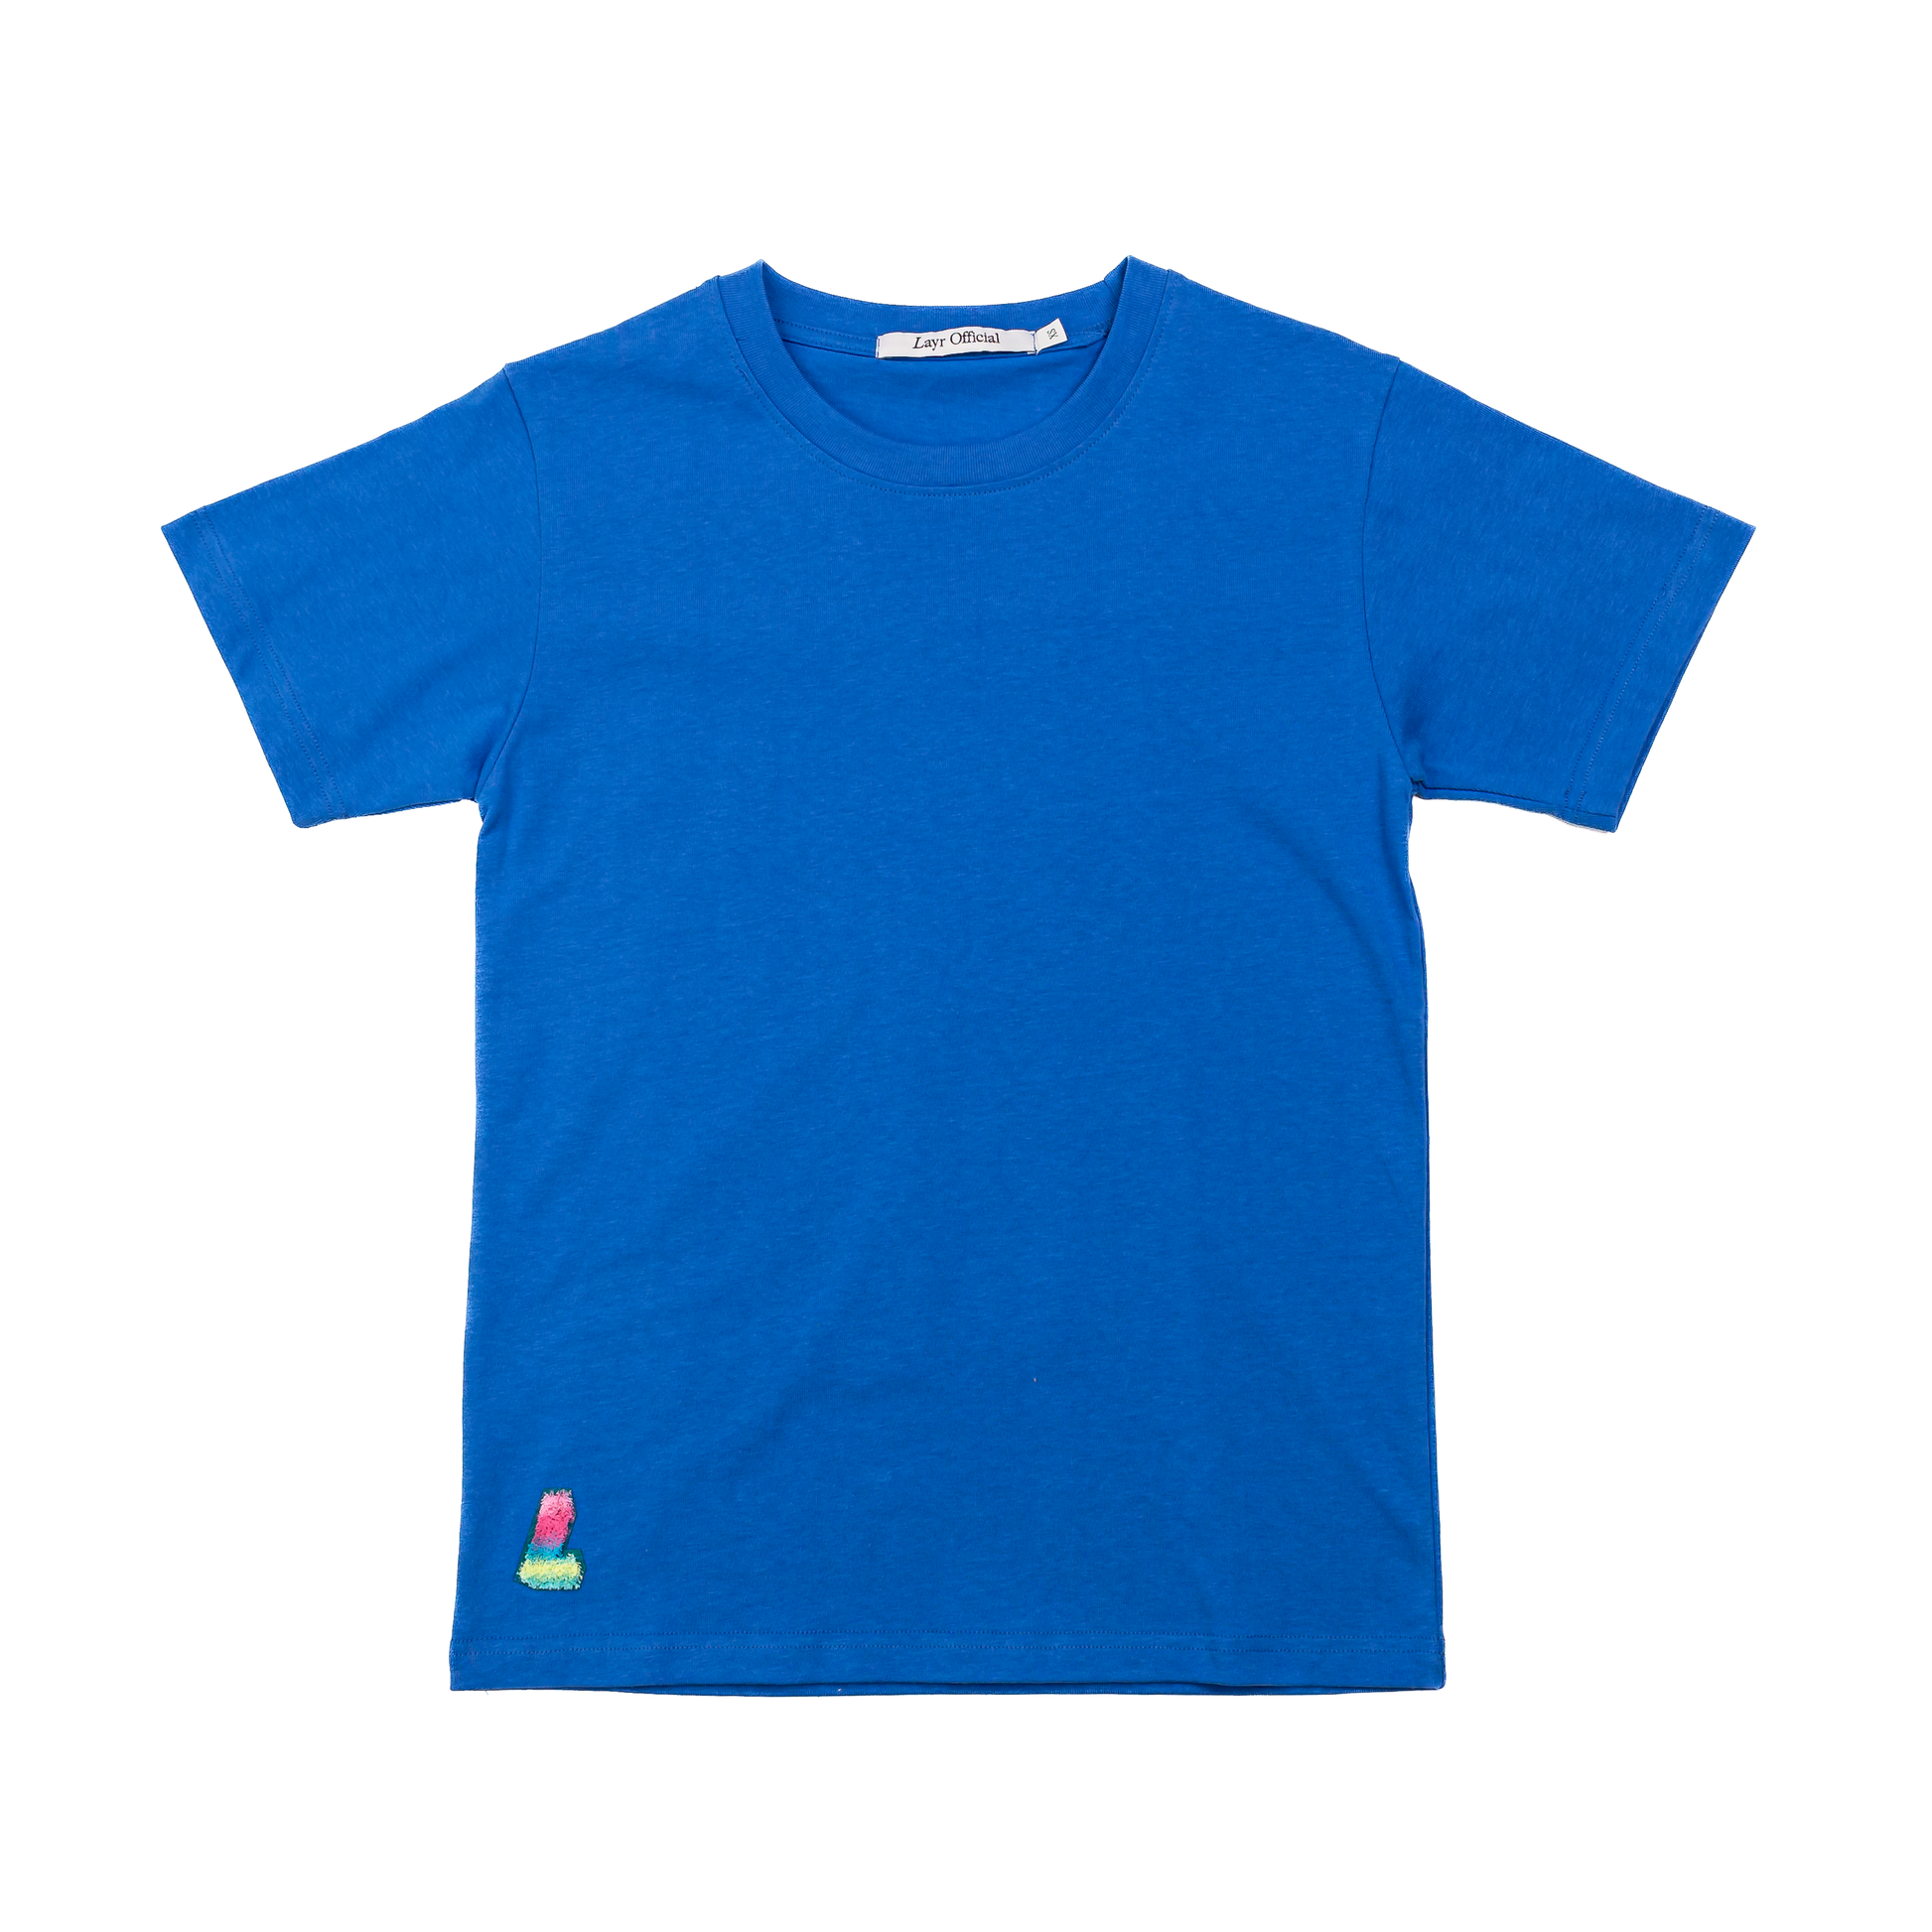 OG L Block Luxury Tee, Washed Blue - Layr Official